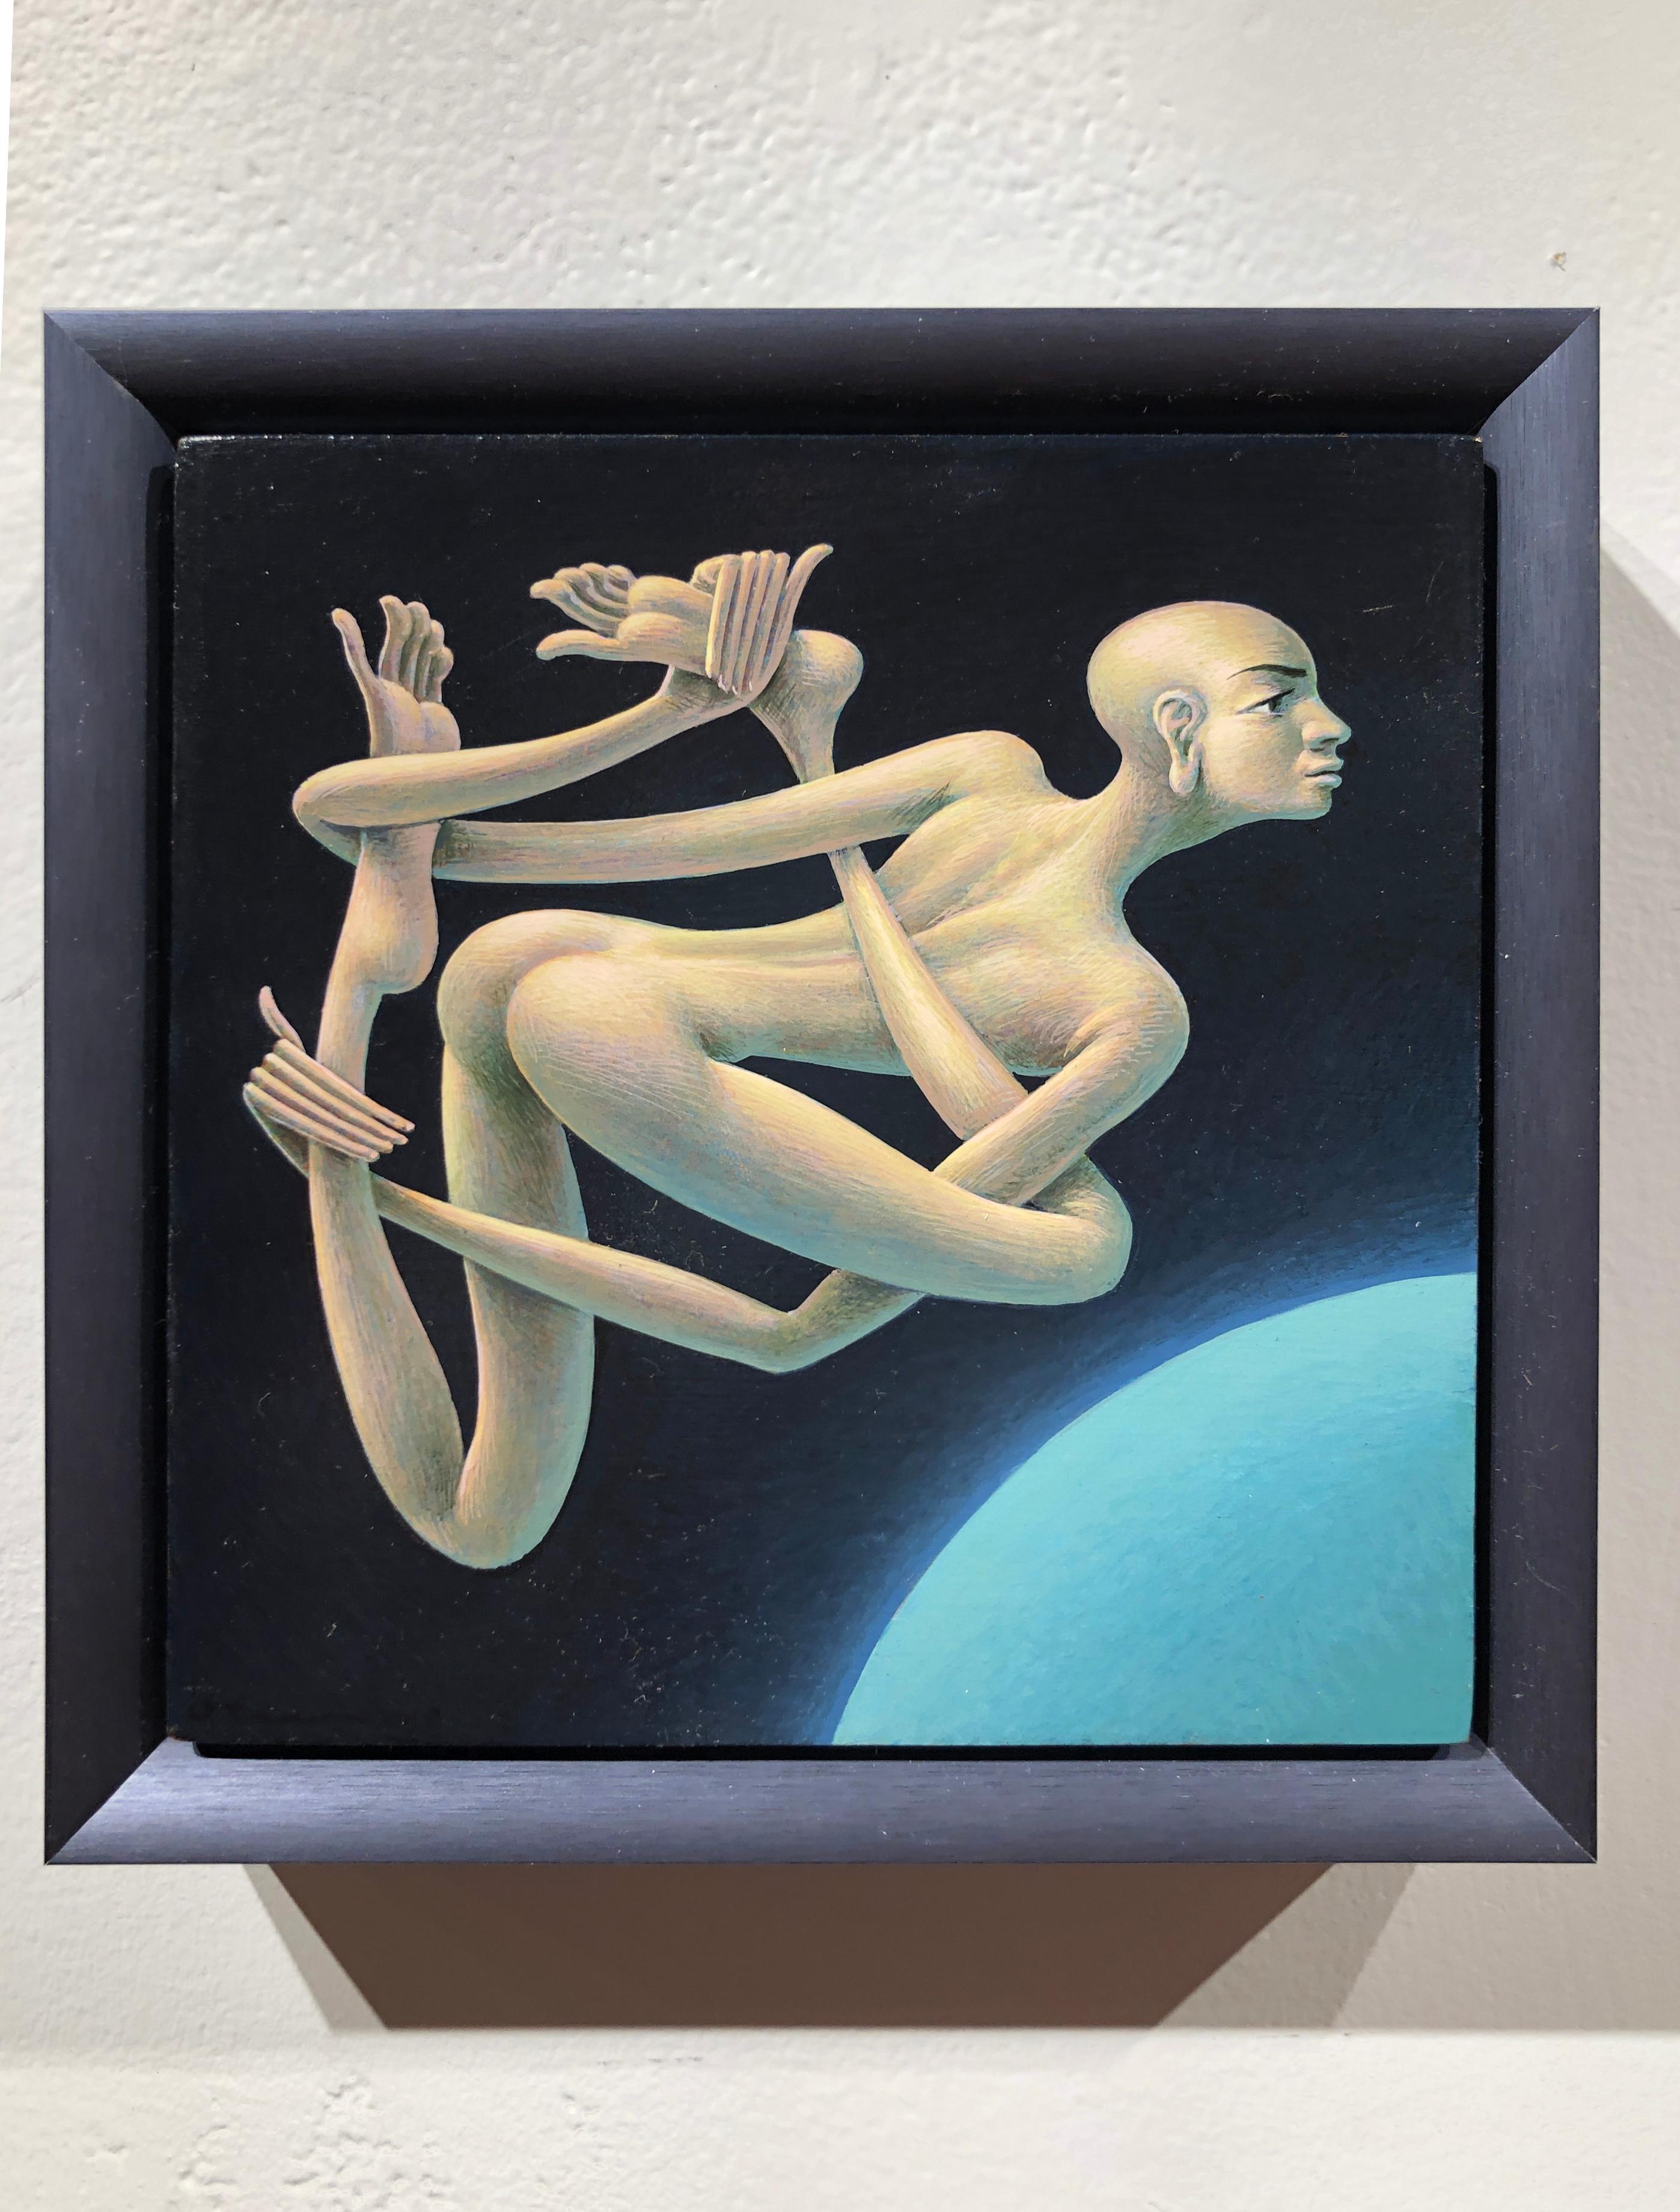 Loft Oberon - Nude Figure with Elongated Twisted Limbs Floating in Space, Framed - Painting by Oliver Hazard Benson